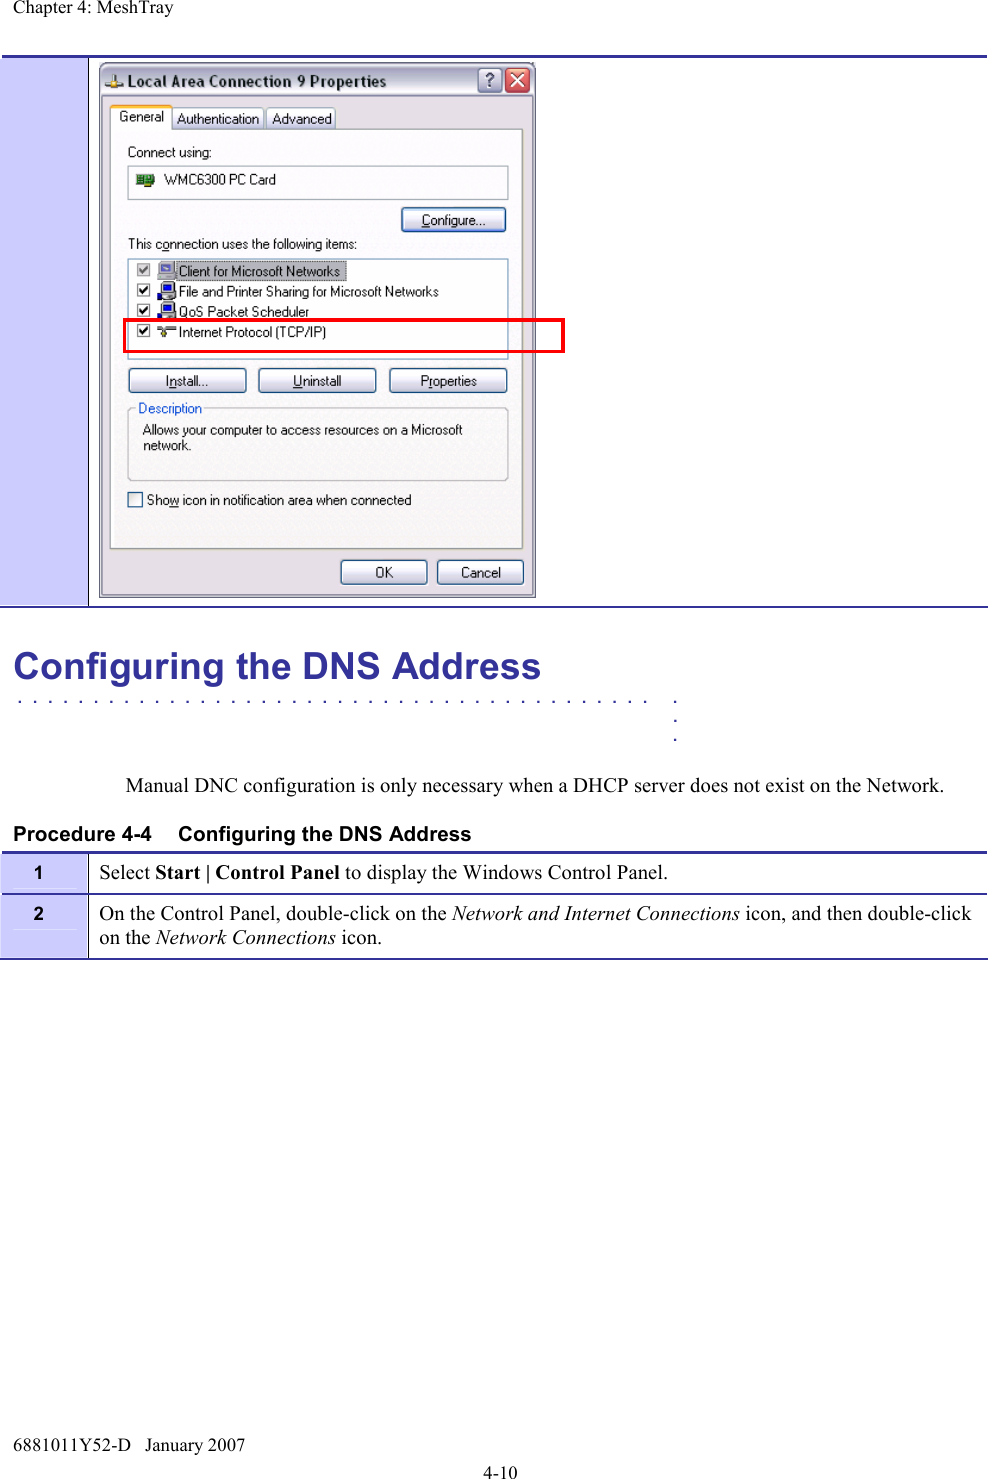 Chapter 4: MeshTray 6881011Y52-D   January 2007 4-10  Configuring the DNS Address . . . . . . . . . . . . . . . . . . . . . . . . . . . . . . . . . . . . . . . . . . .    .      .  Manual DNC configuration is only necessary when a DHCP server does not exist on the Network. Procedure 4-4  Configuring the DNS Address 1  Select Start | Control Panel to display the Windows Control Panel. 2  On the Control Panel, double-click on the Network and Internet Connections icon, and then double-click on the Network Connections icon. 